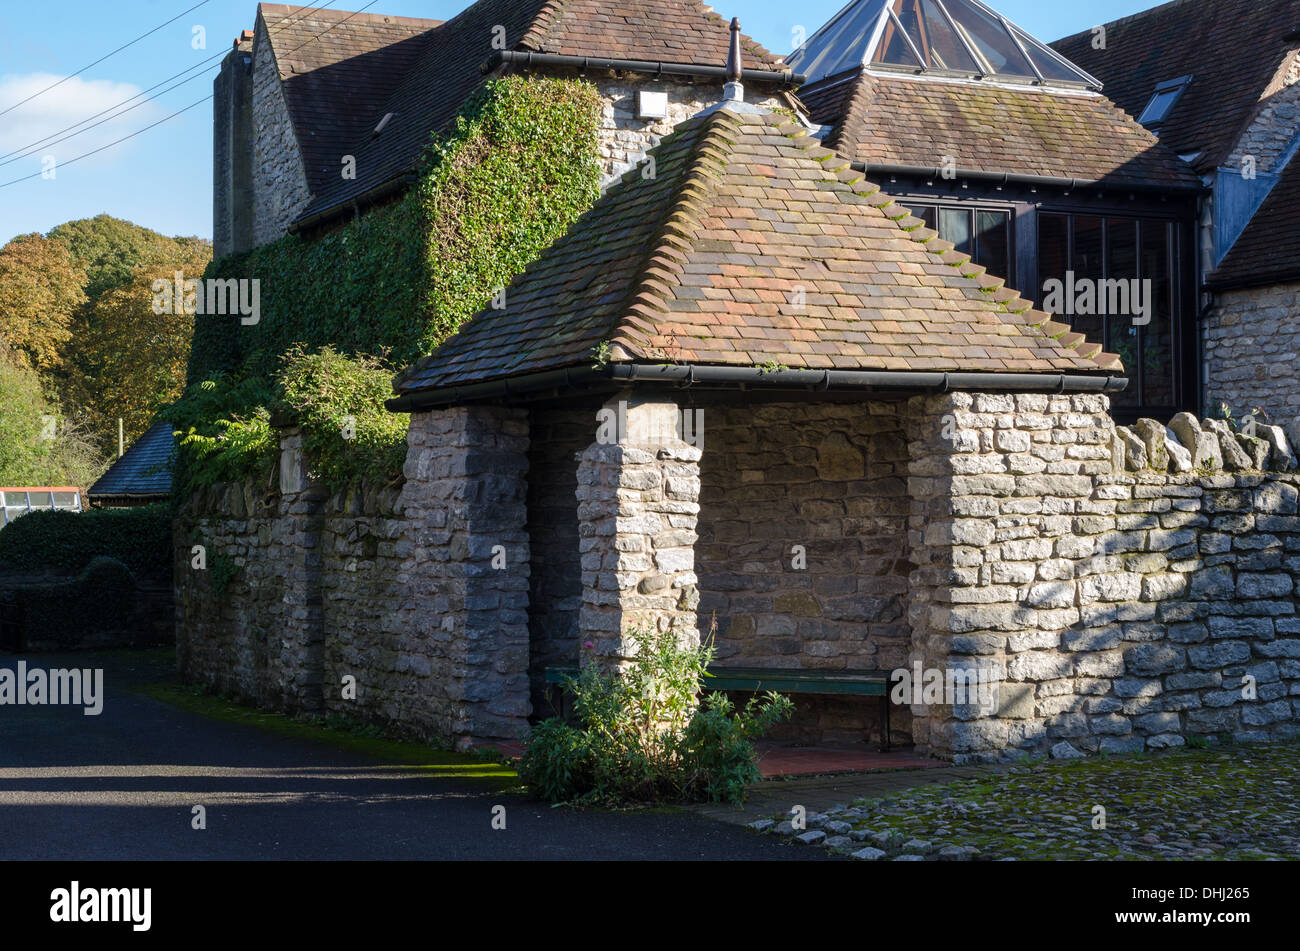 Bus shelter built from stone with a tiled pitched roof in Much Wenlock, Shropshire Stock Photo